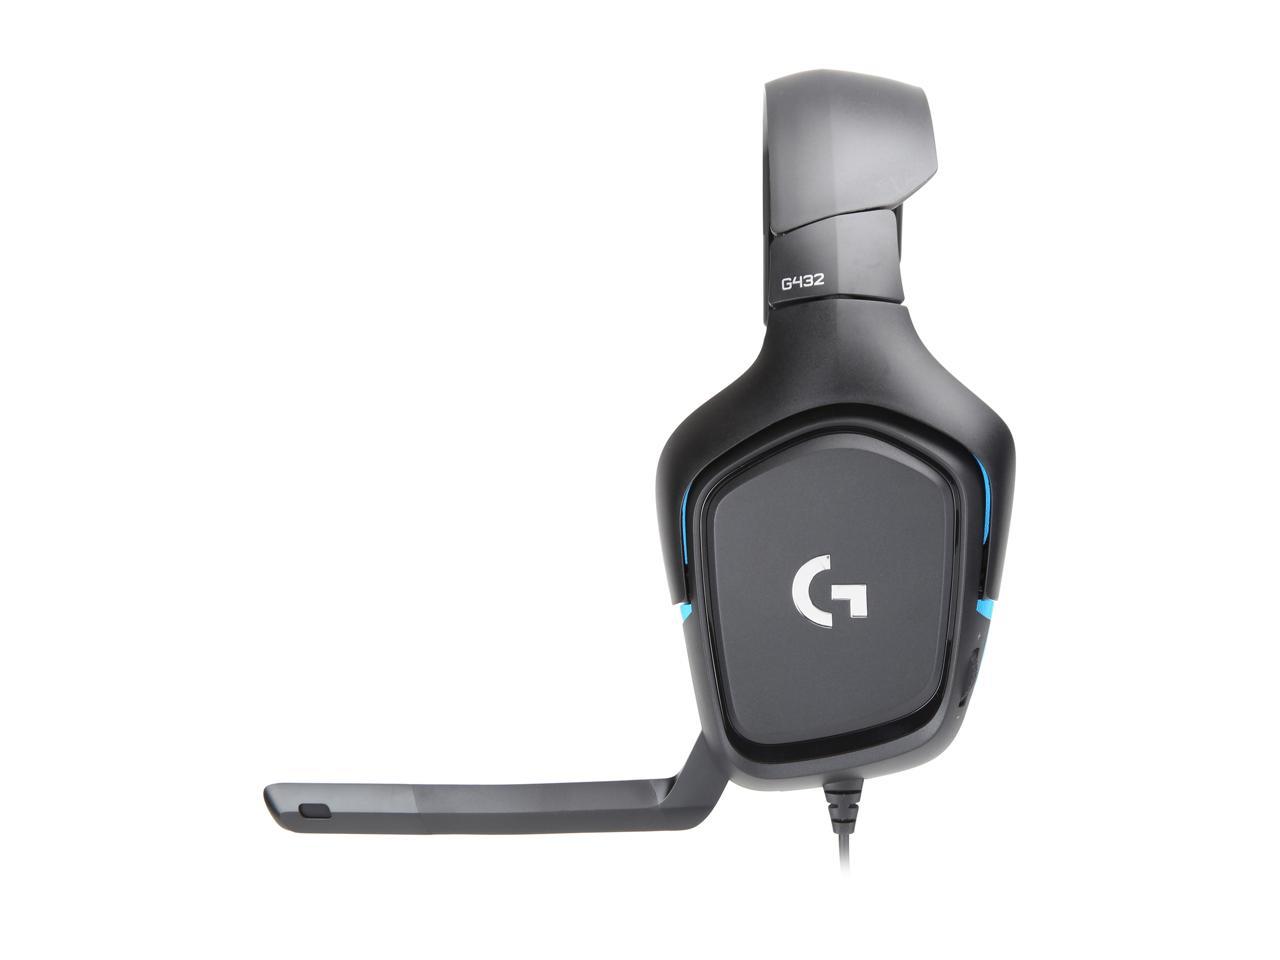 Logitech G432 Wired Gaming Headset, 7.1 Surround Sound, USB and 3.5 mm Jack, Black - image 1 of 7